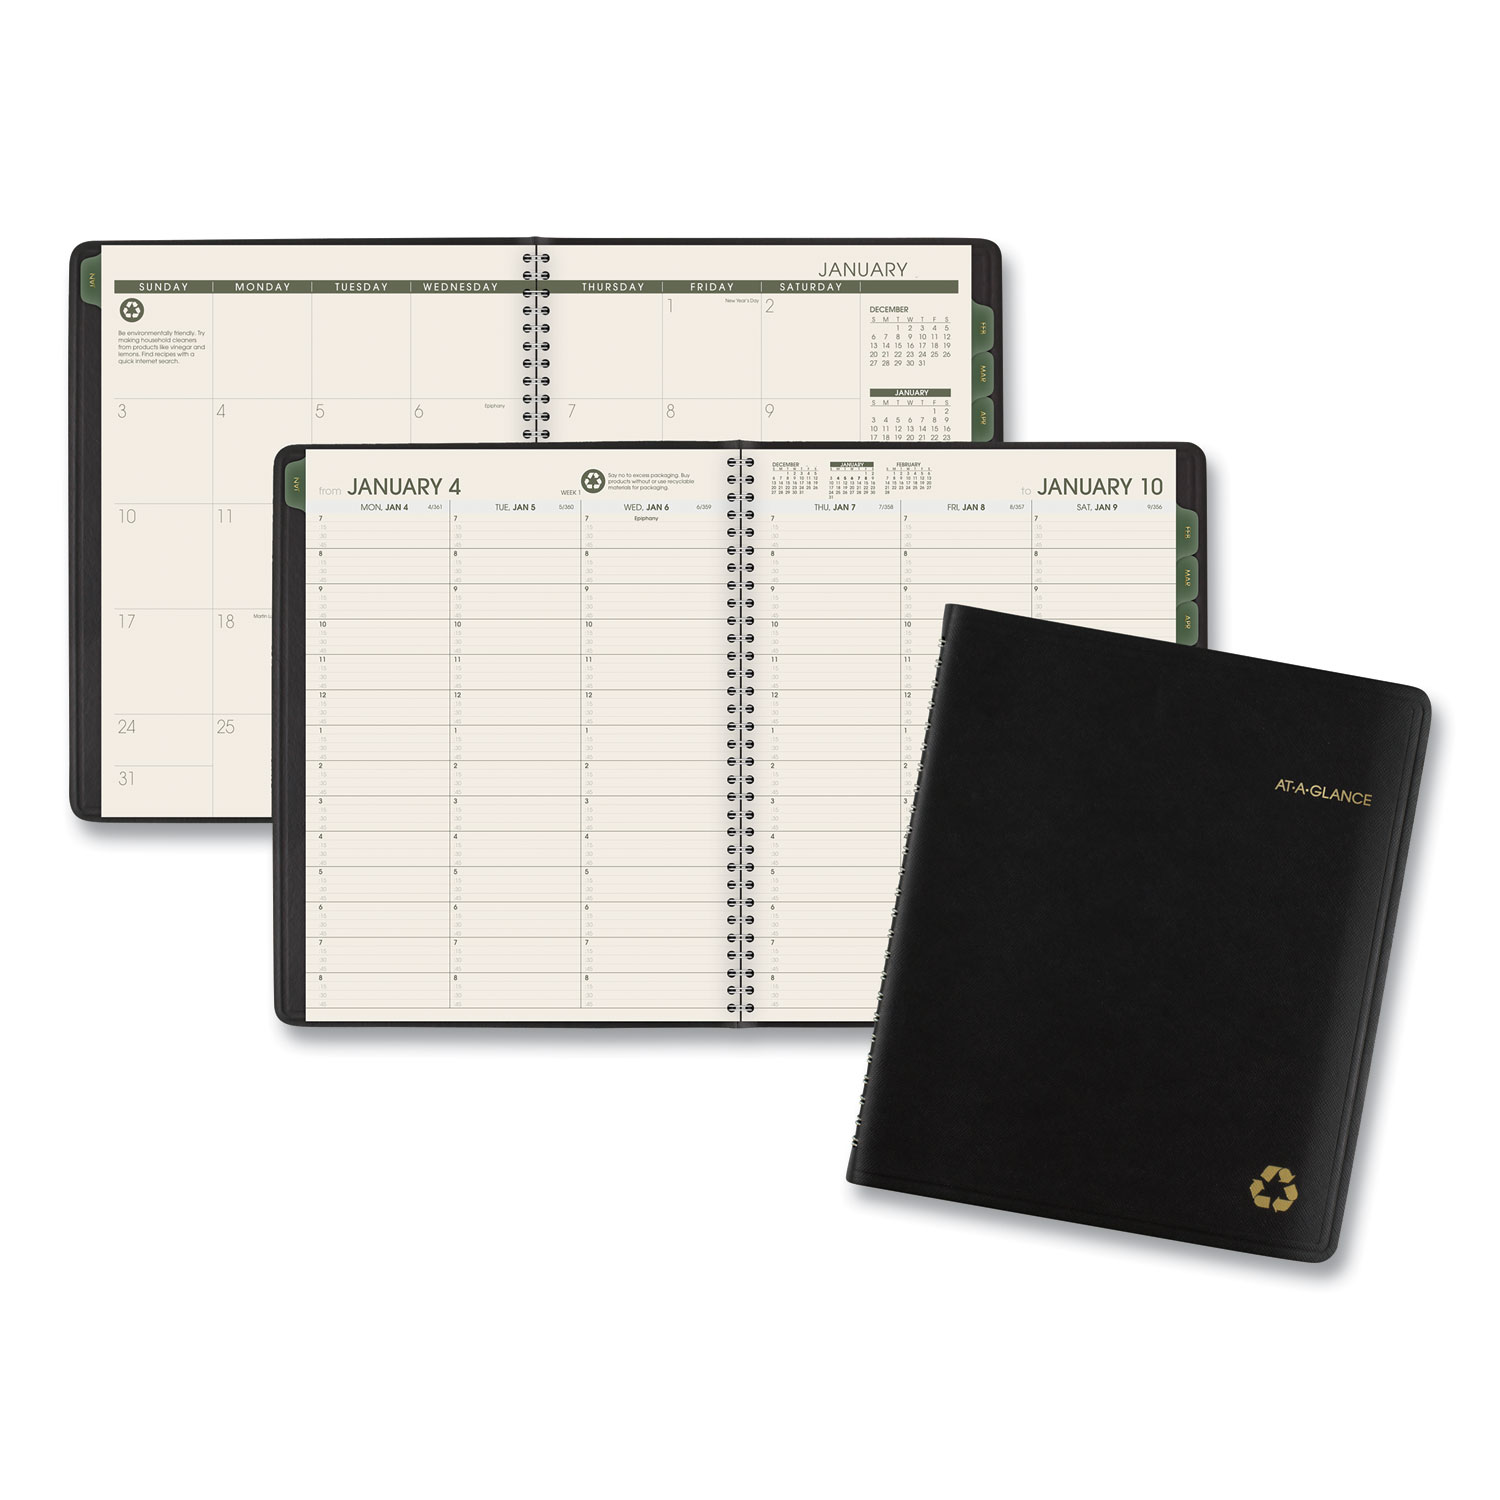  AT-A-GLANCE 70951G05 Recycled Weekly/Monthly Classic Appointment Book, 8.75 x 7, Black, 2020 (AAG70951G05) 